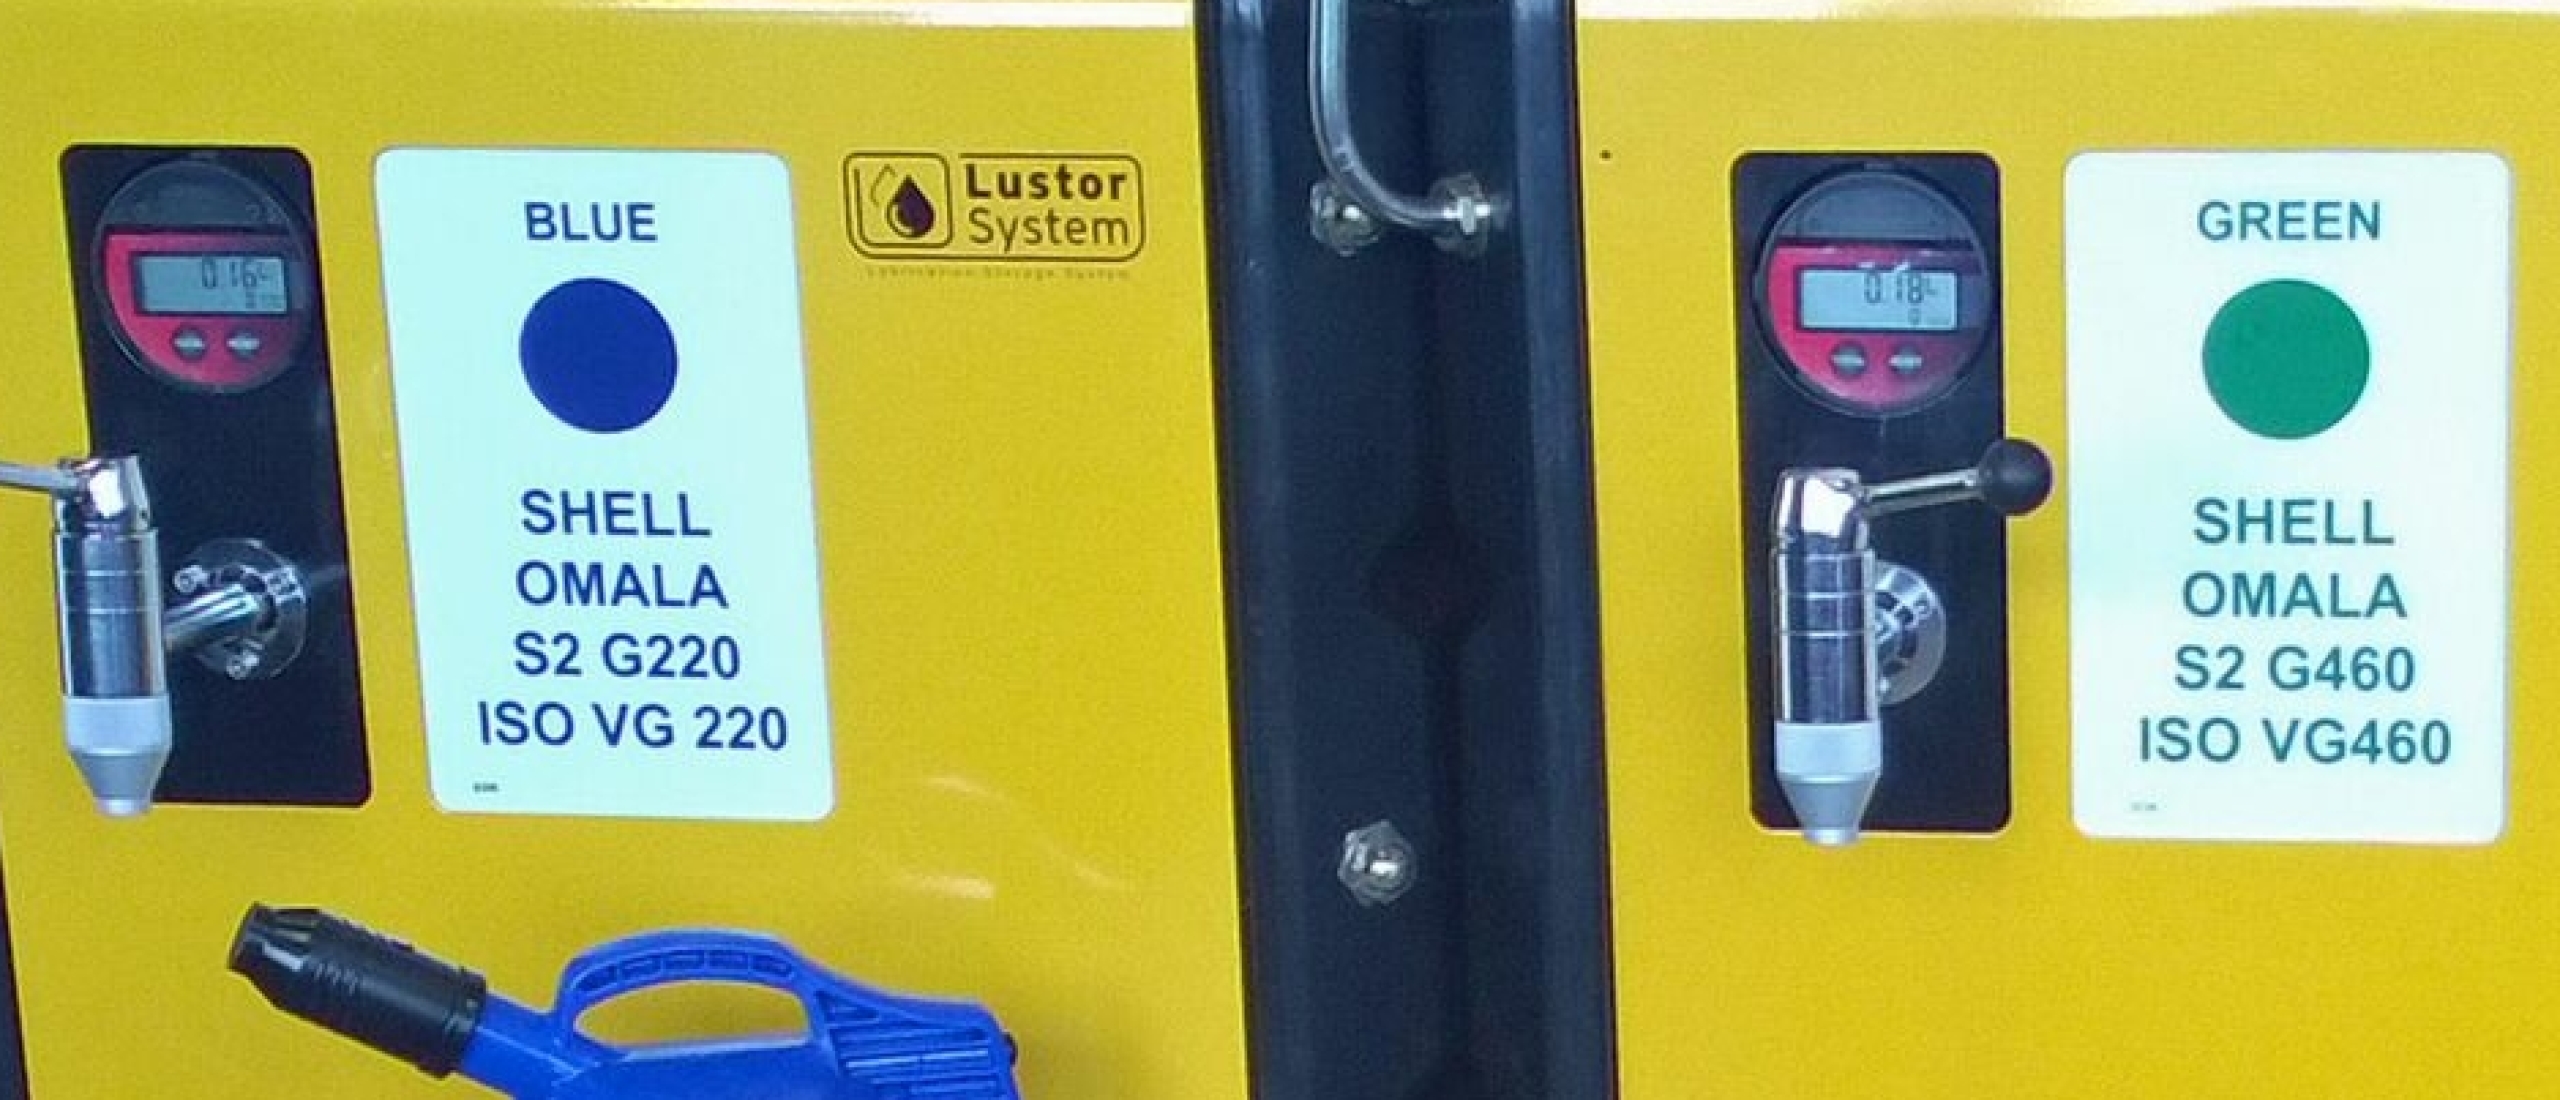 Lustor system with auto shut-off dispensing tap